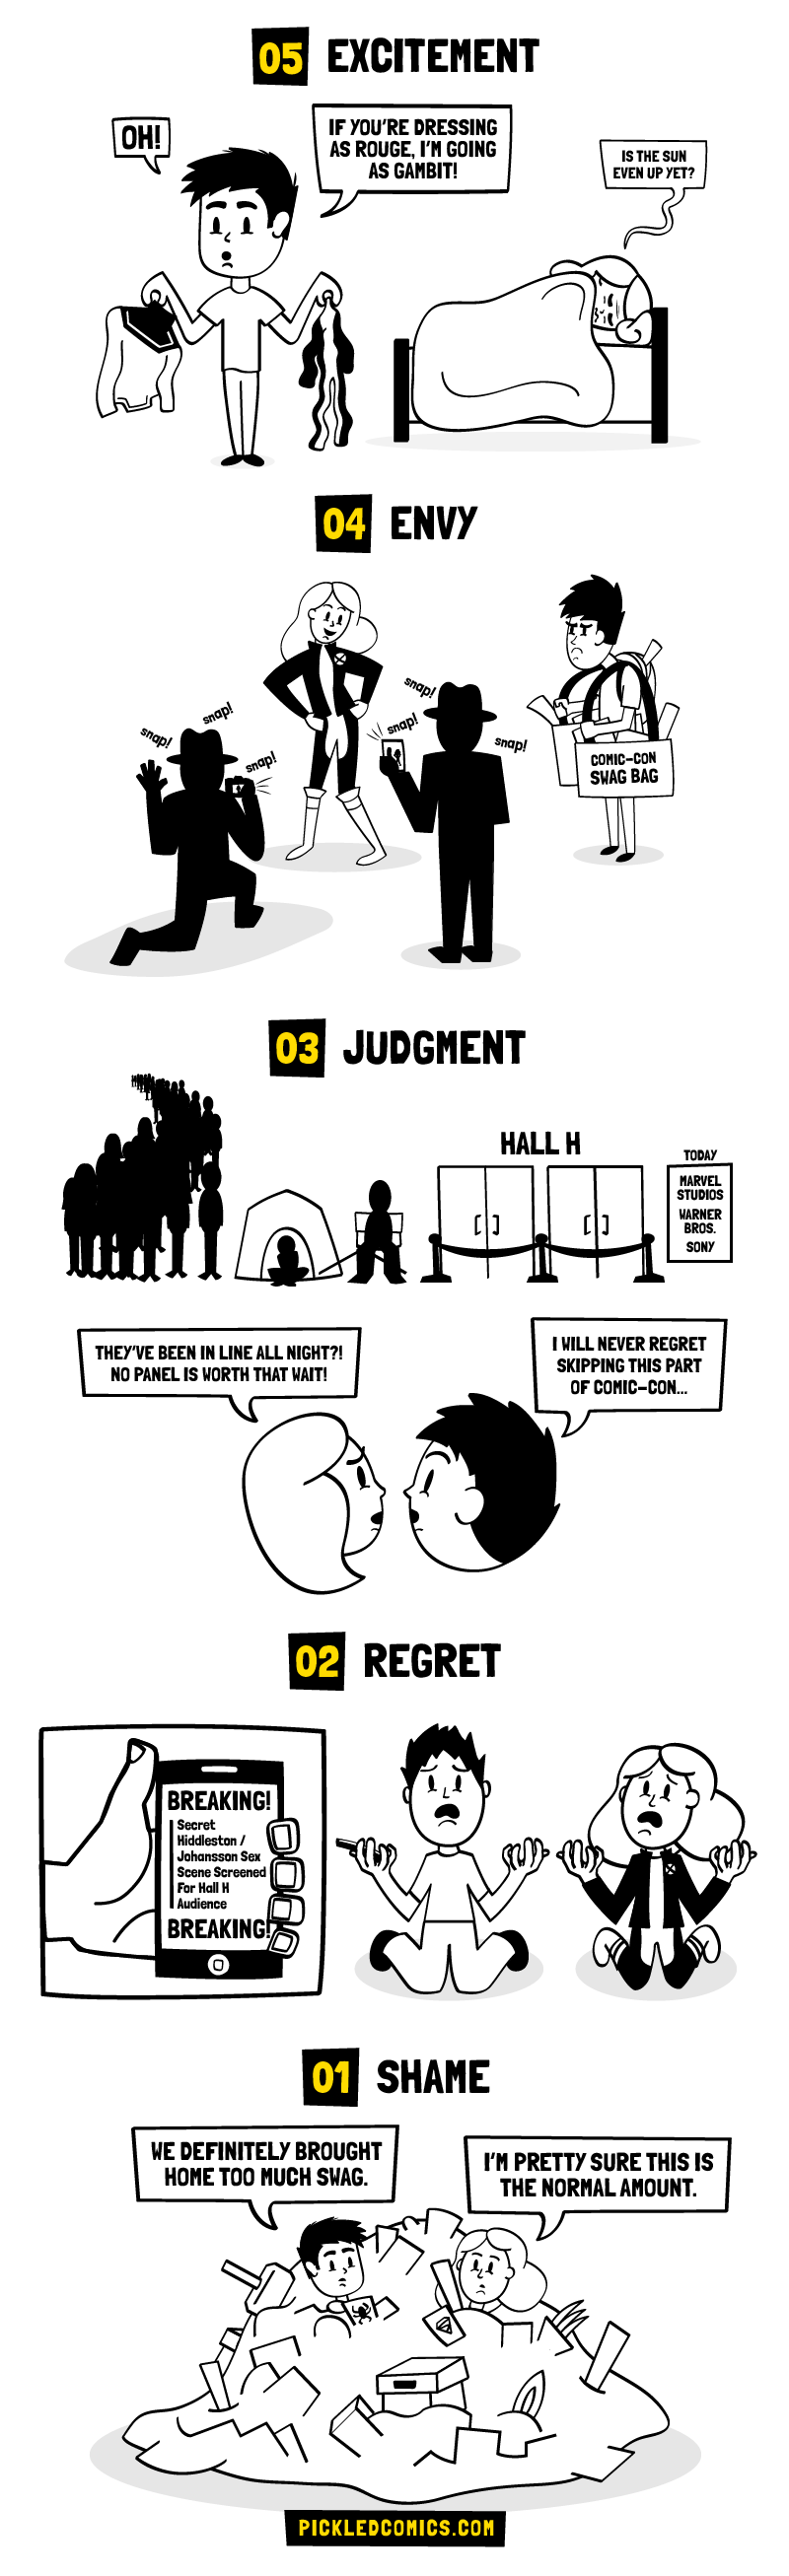 The five stages of visiting Comic-Con. Excitement, Envy, Judgment, Regret, and Shame.